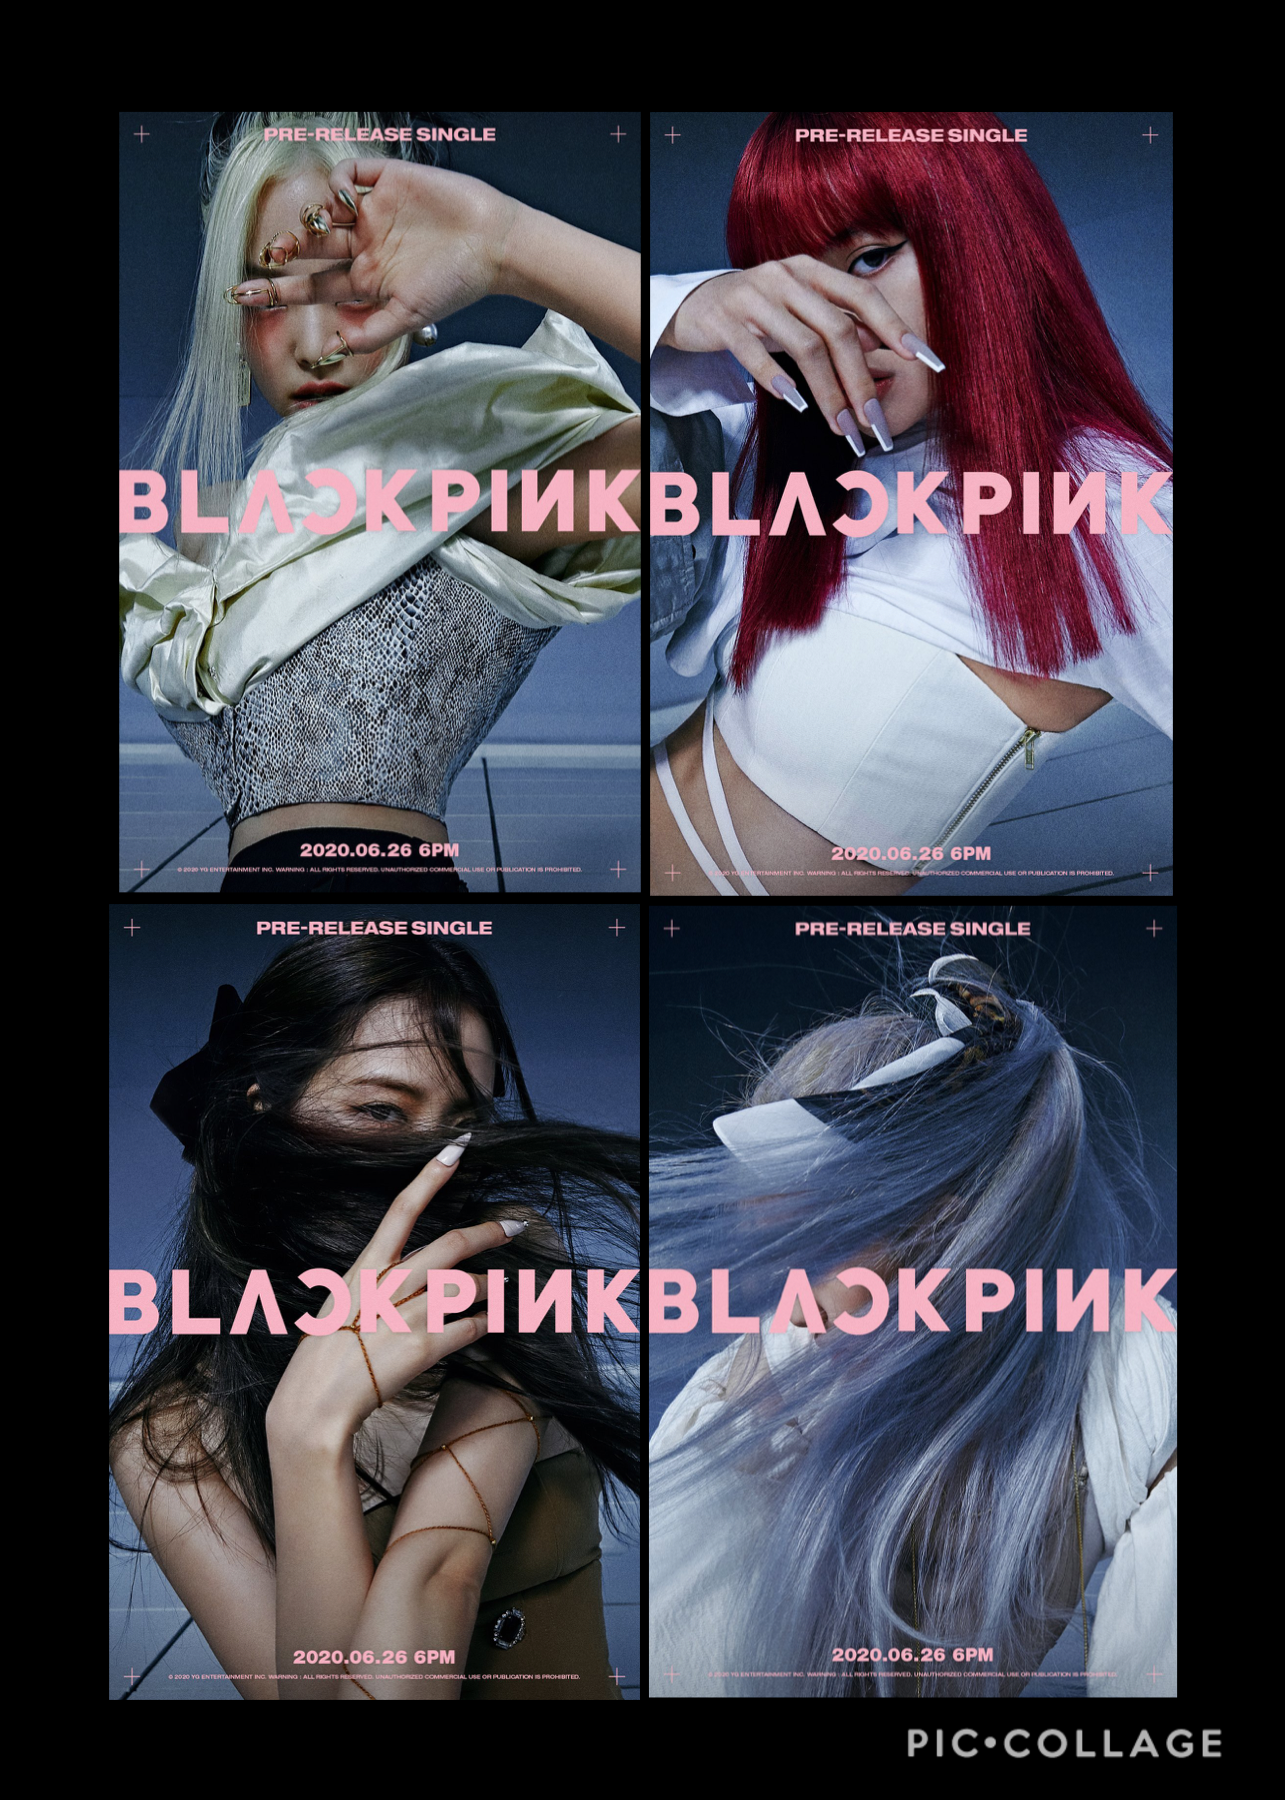 ok but this comeback is high budget 🤯🤩 after this comeback, rosé, jisoo & lisa are releasing their solo albums!!! it’ll be released around fall, but i’m so stoked 🥰 these teaser photos are 🤩🙌🏼 looK @ their hair 😧 — so glad rosé is blond anymore though 🌝 j